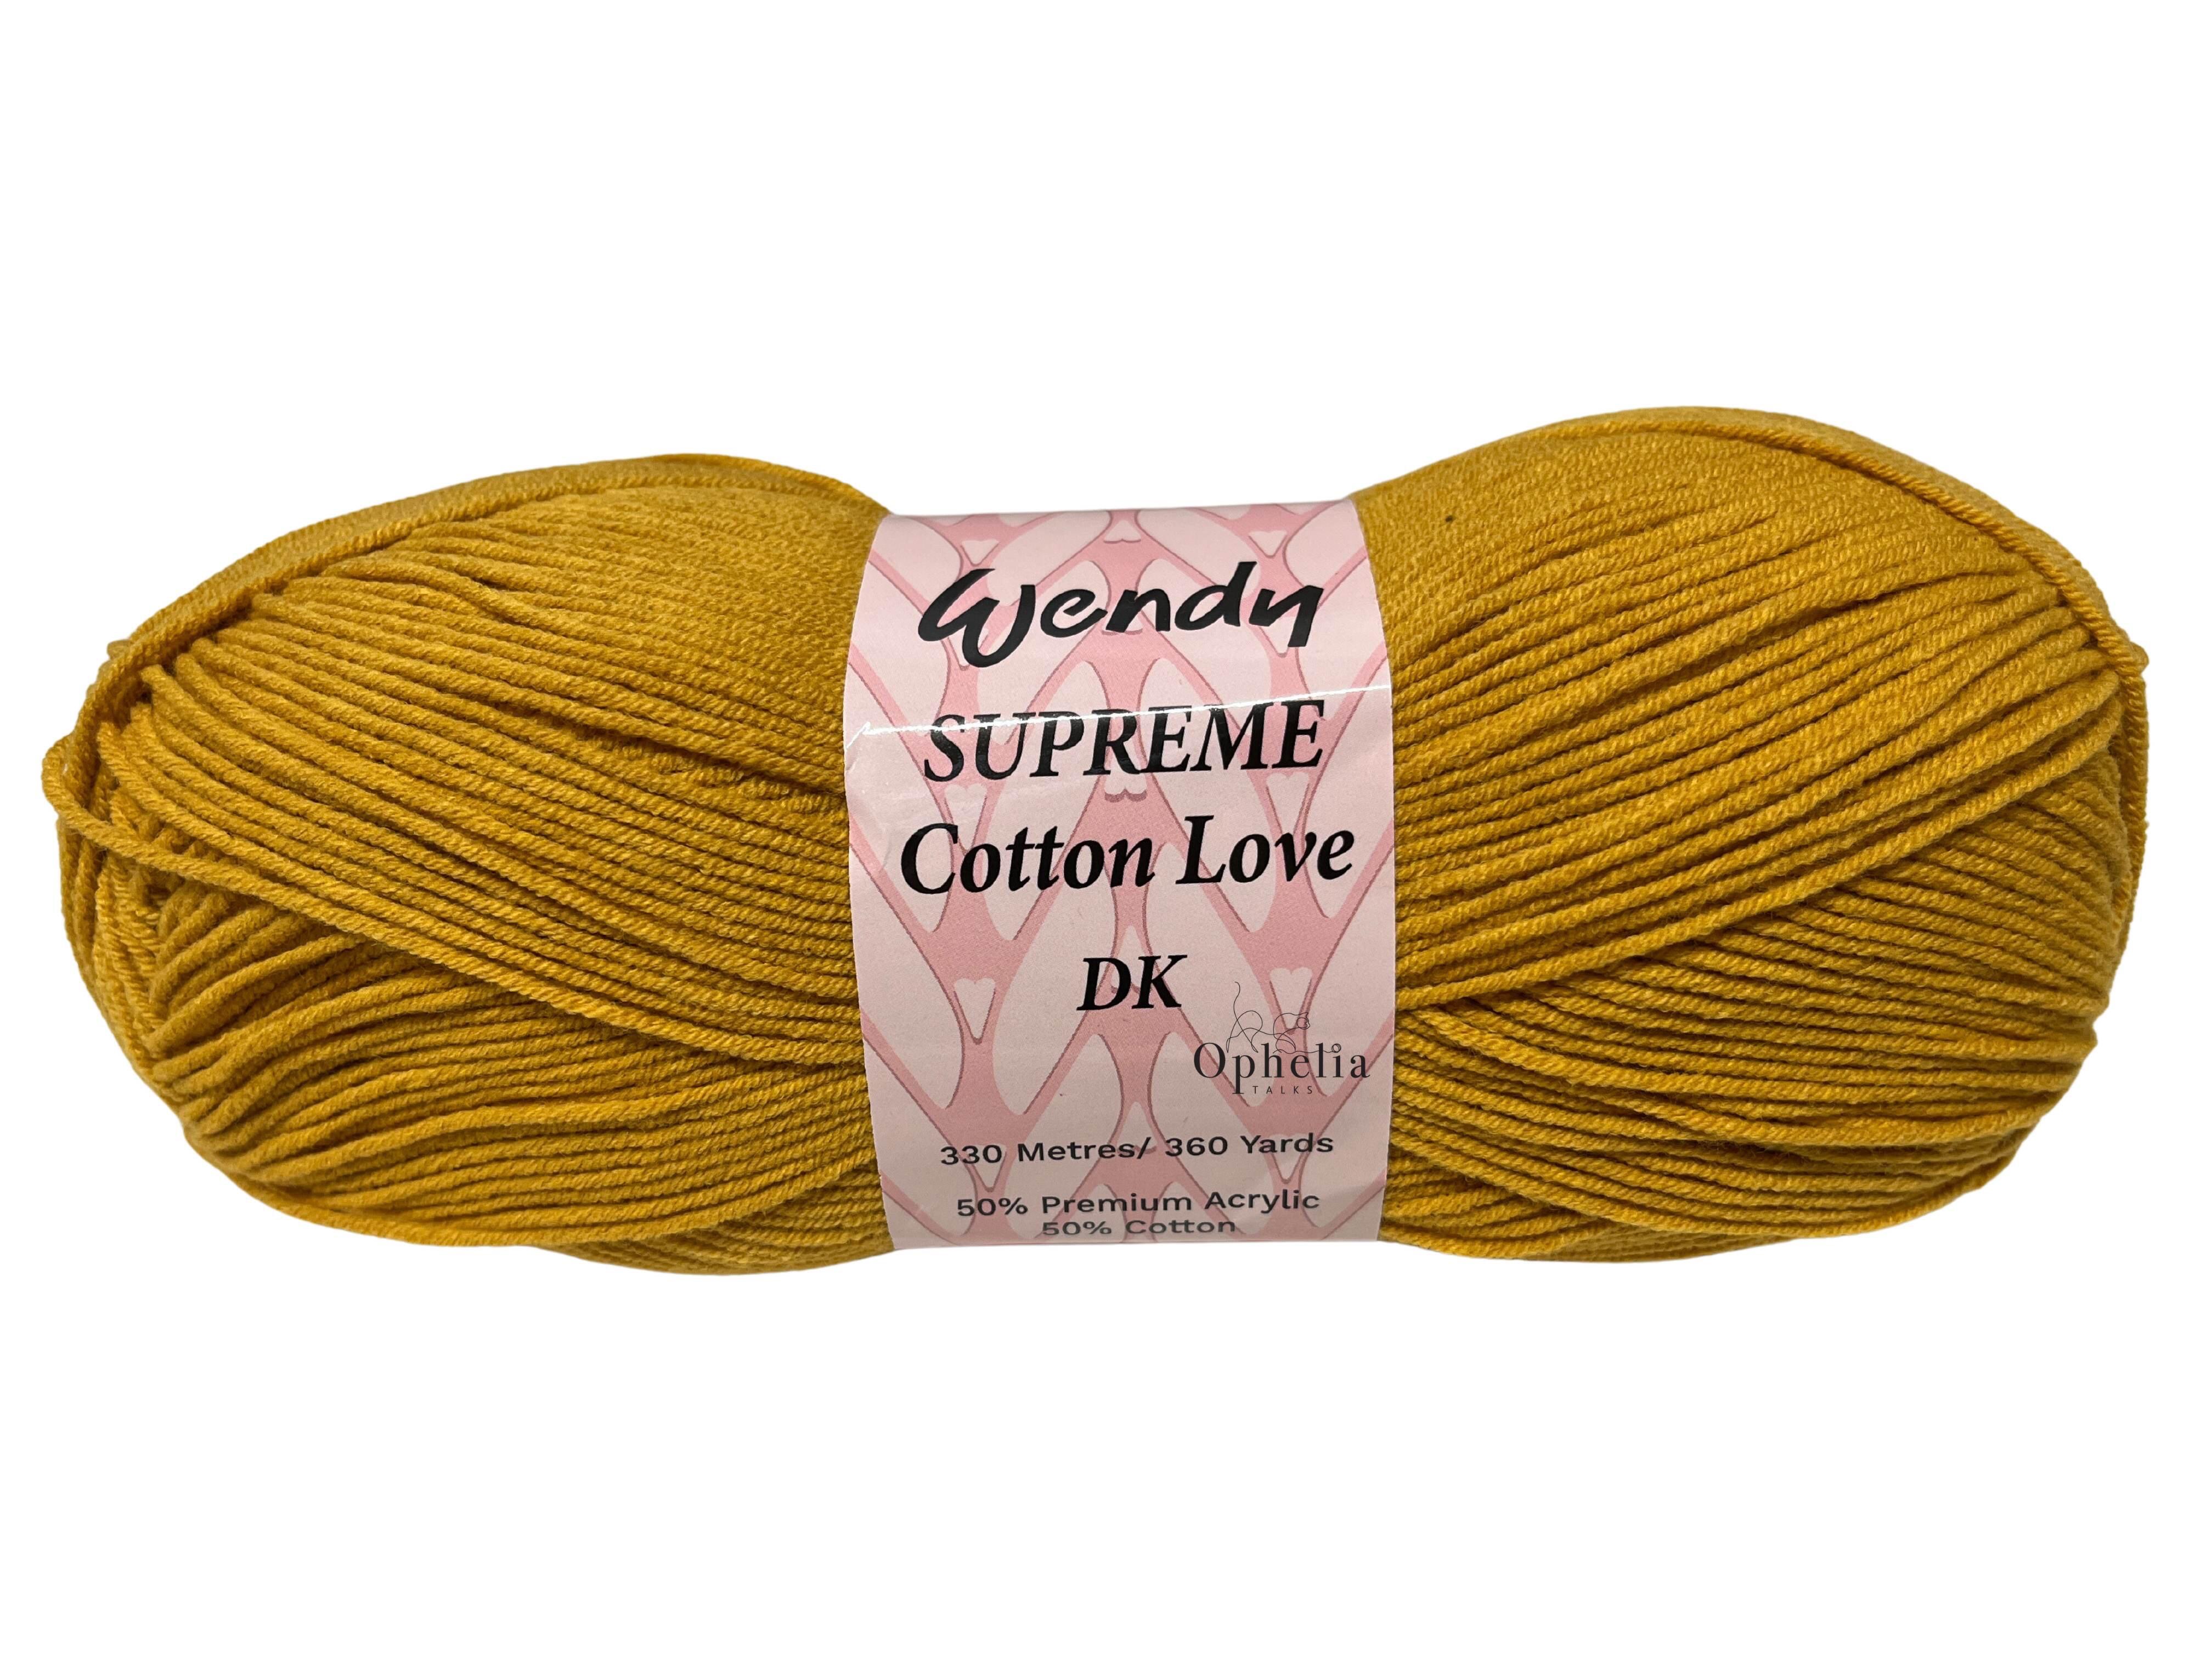 Wendy supreme cotton love in the colour Antique Gold WCT14